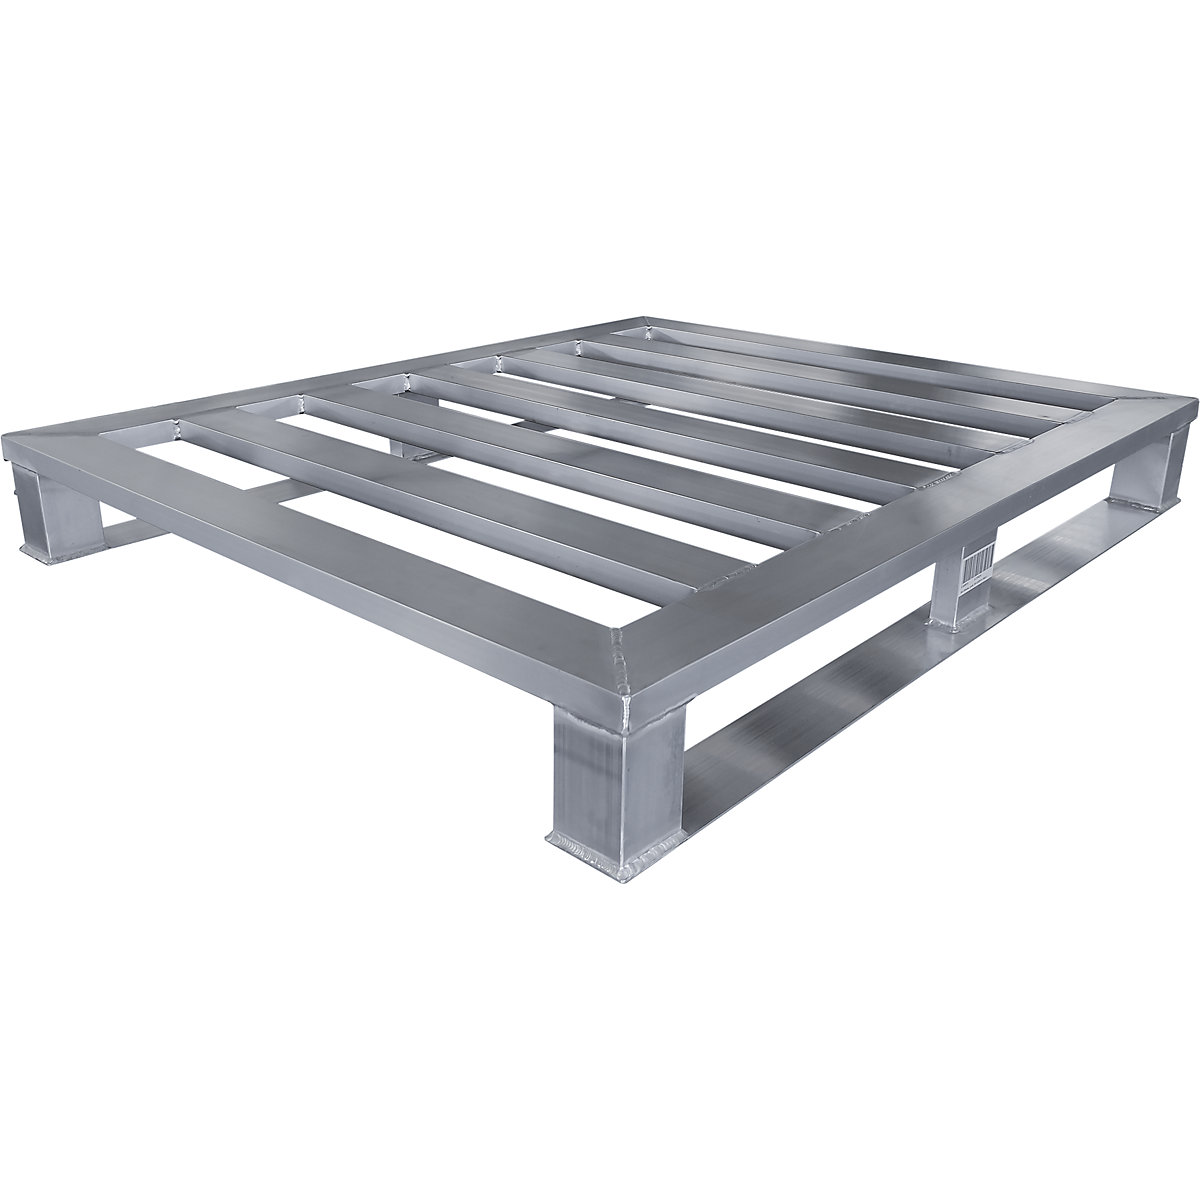 Aluminium flat pallet, with 2 runners, LxW 1200 x 800 mm